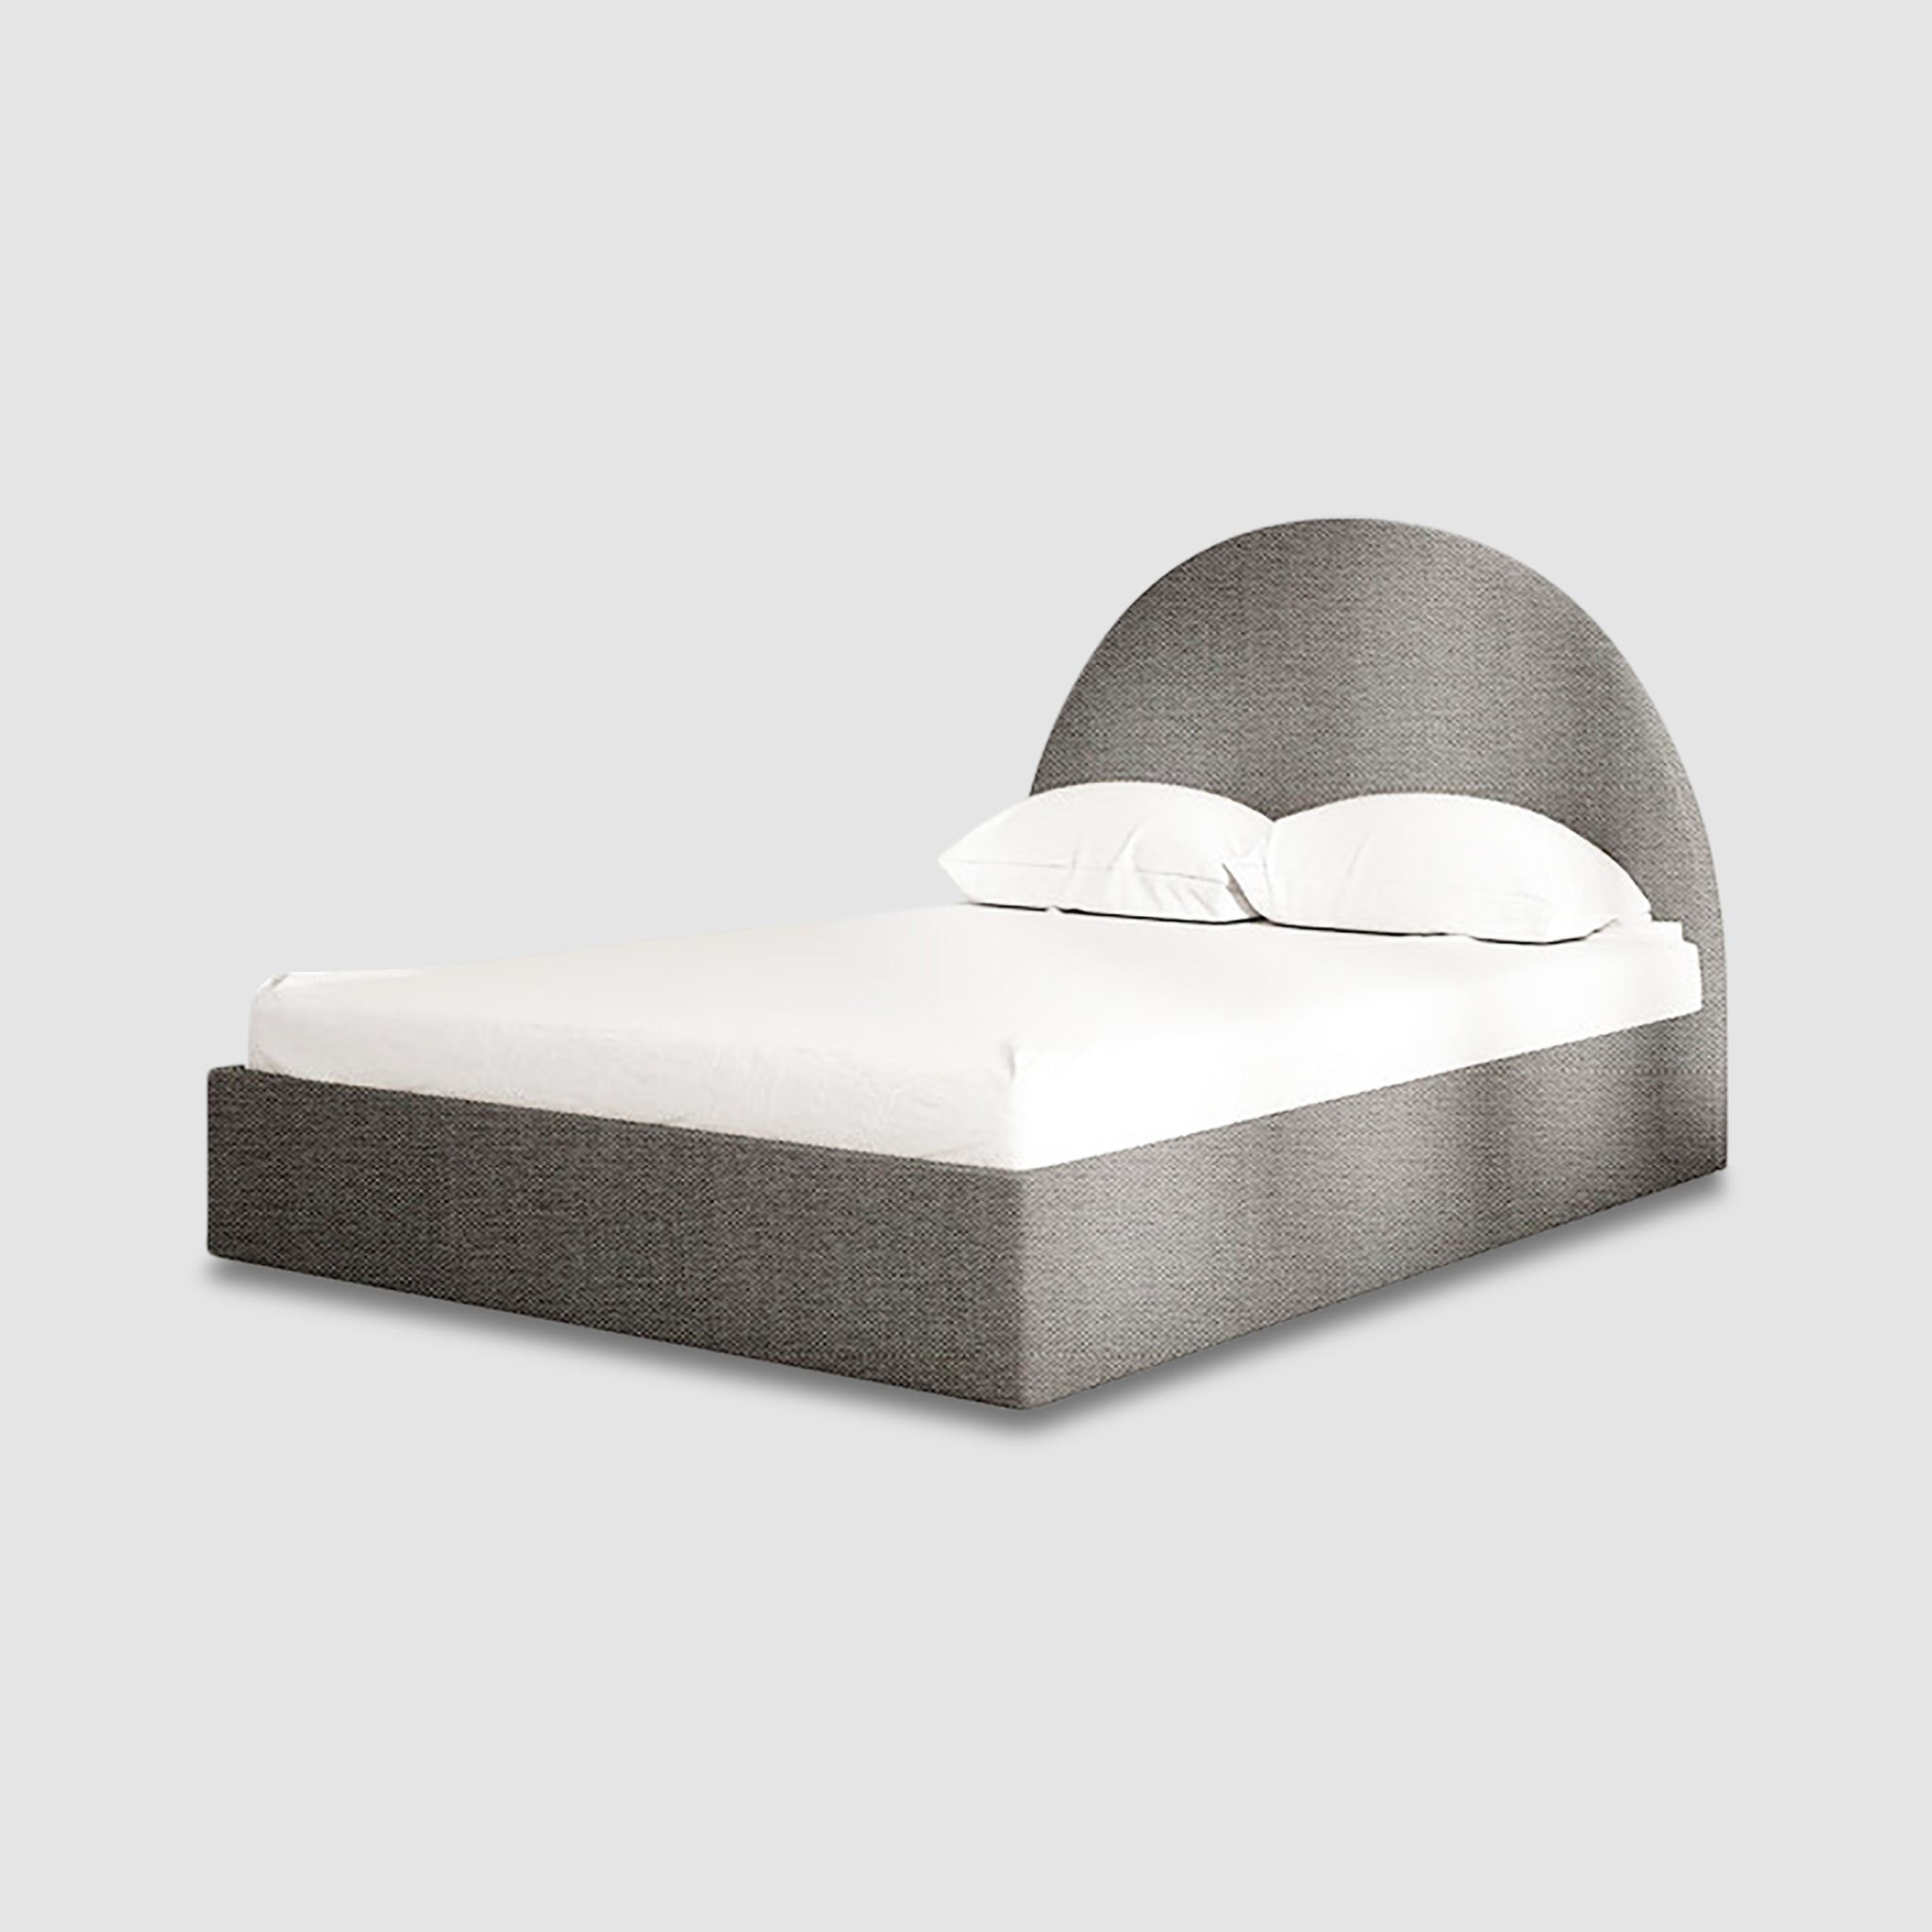 Space-efficient Archie Bed with a luxurious textured grey headboard.